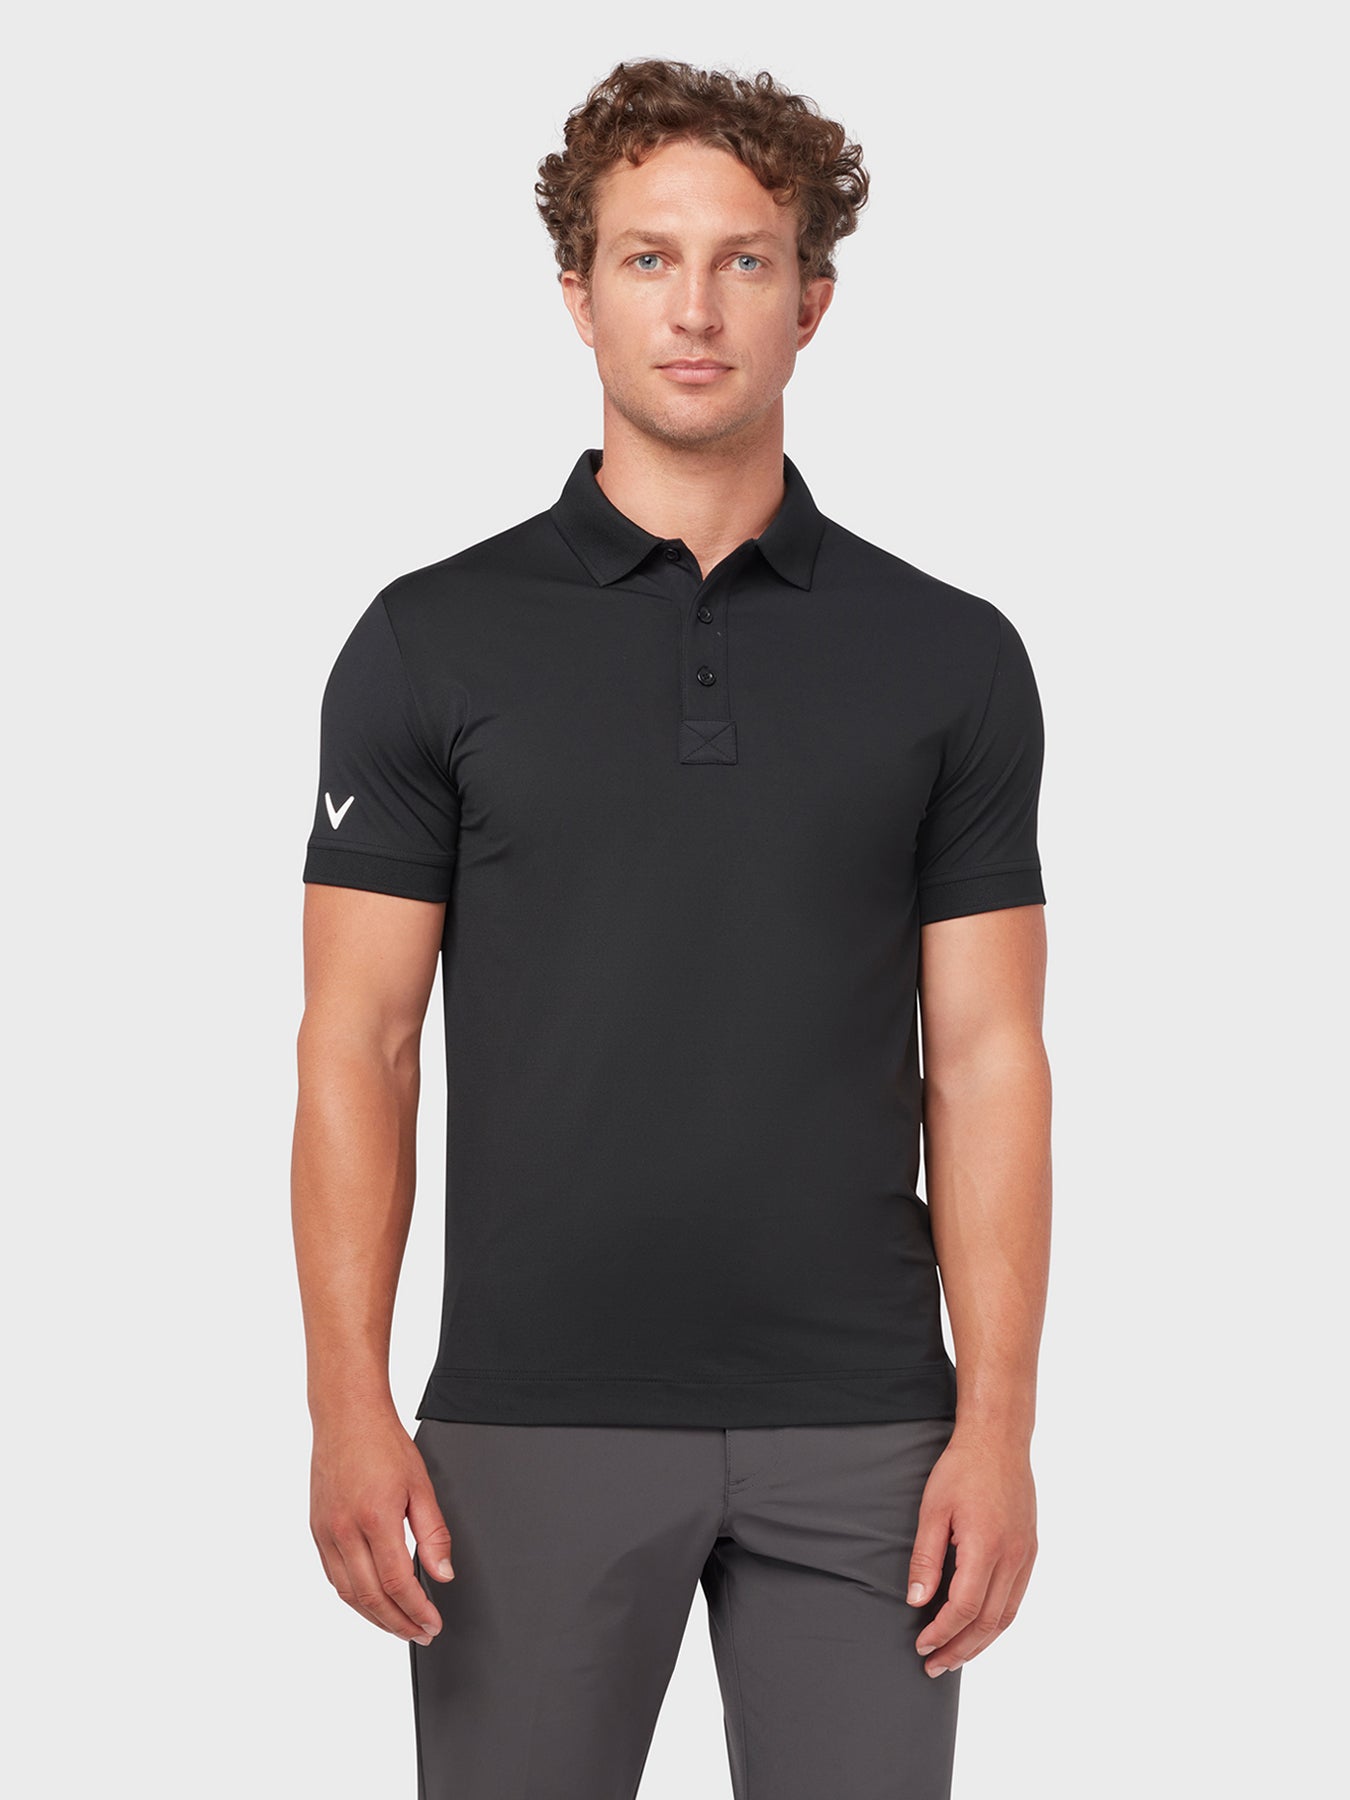 View X Series Solid Ribbed Polo In Caviar Caviar XS information